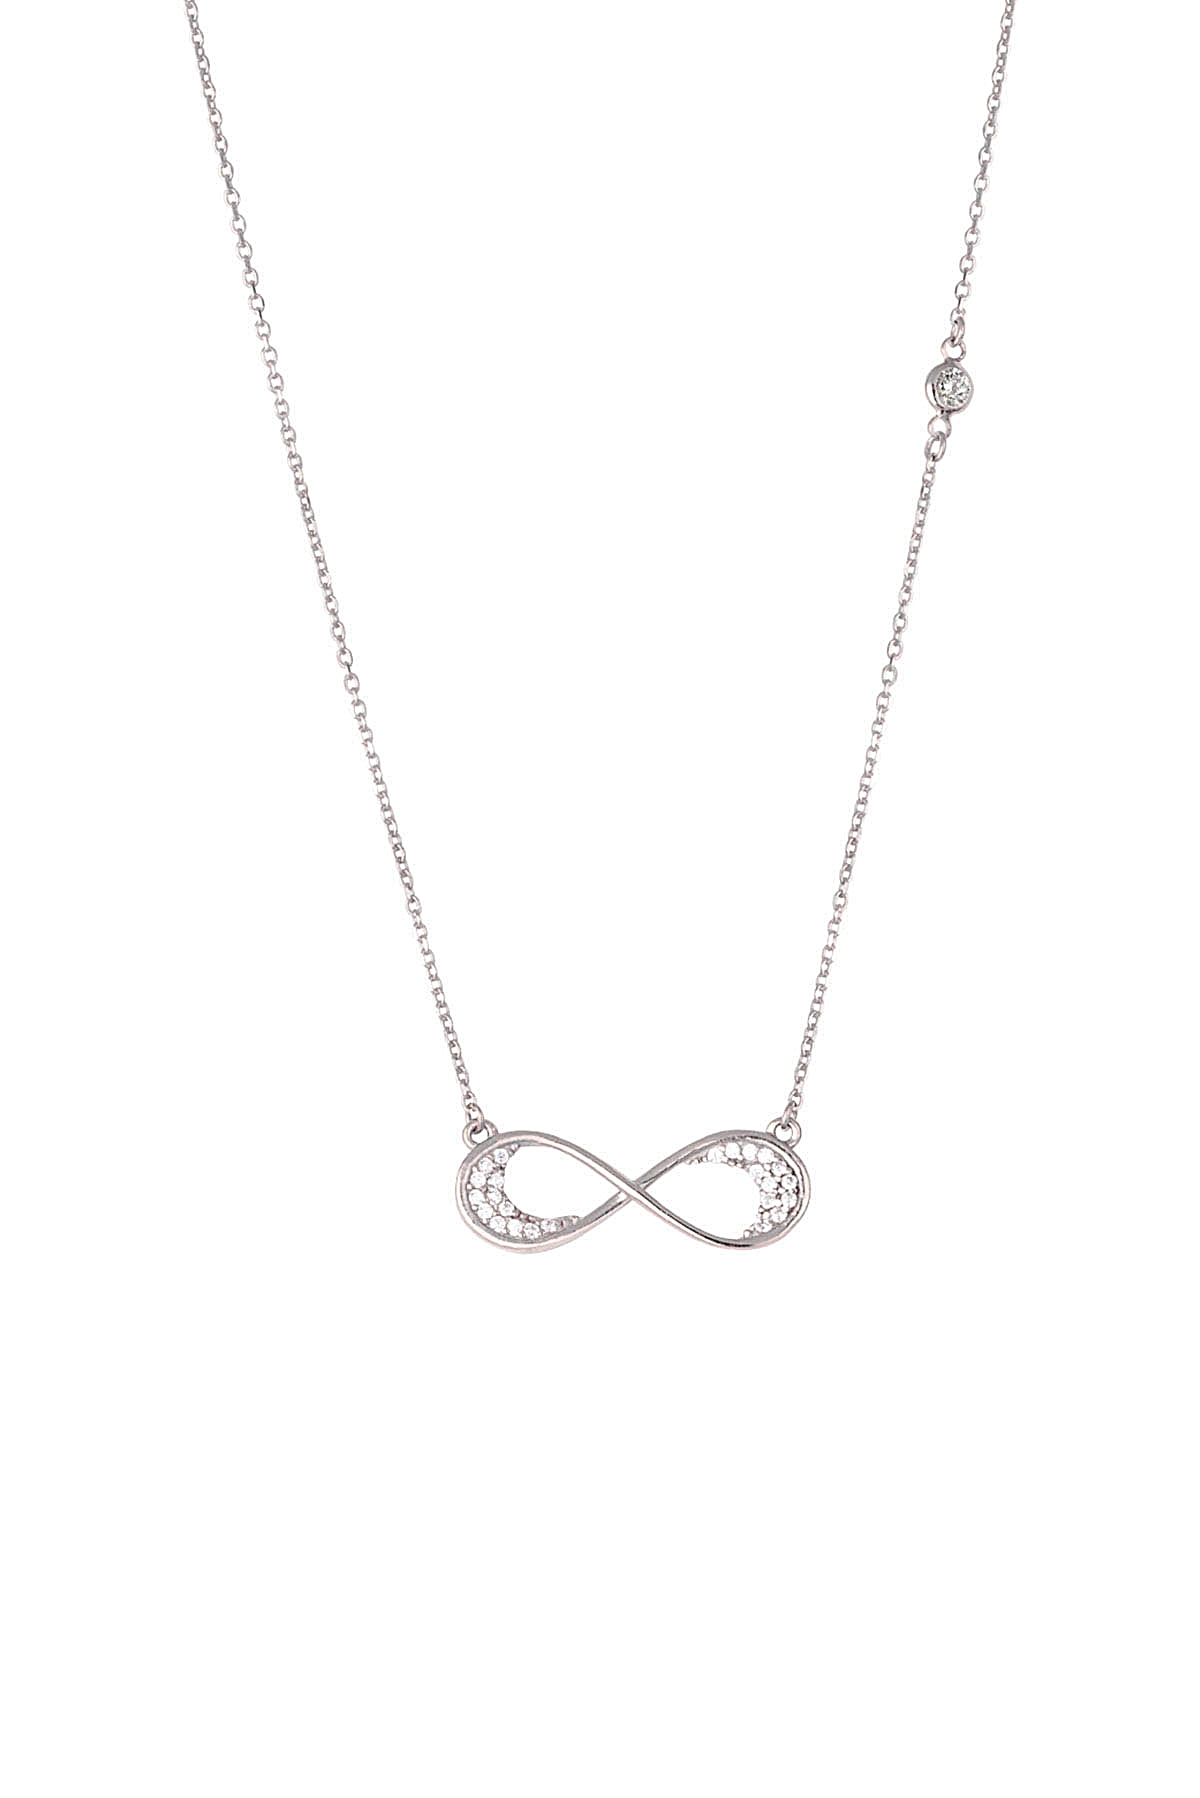 Silver Necklace Infinity Design Zircoina 925 Sterling